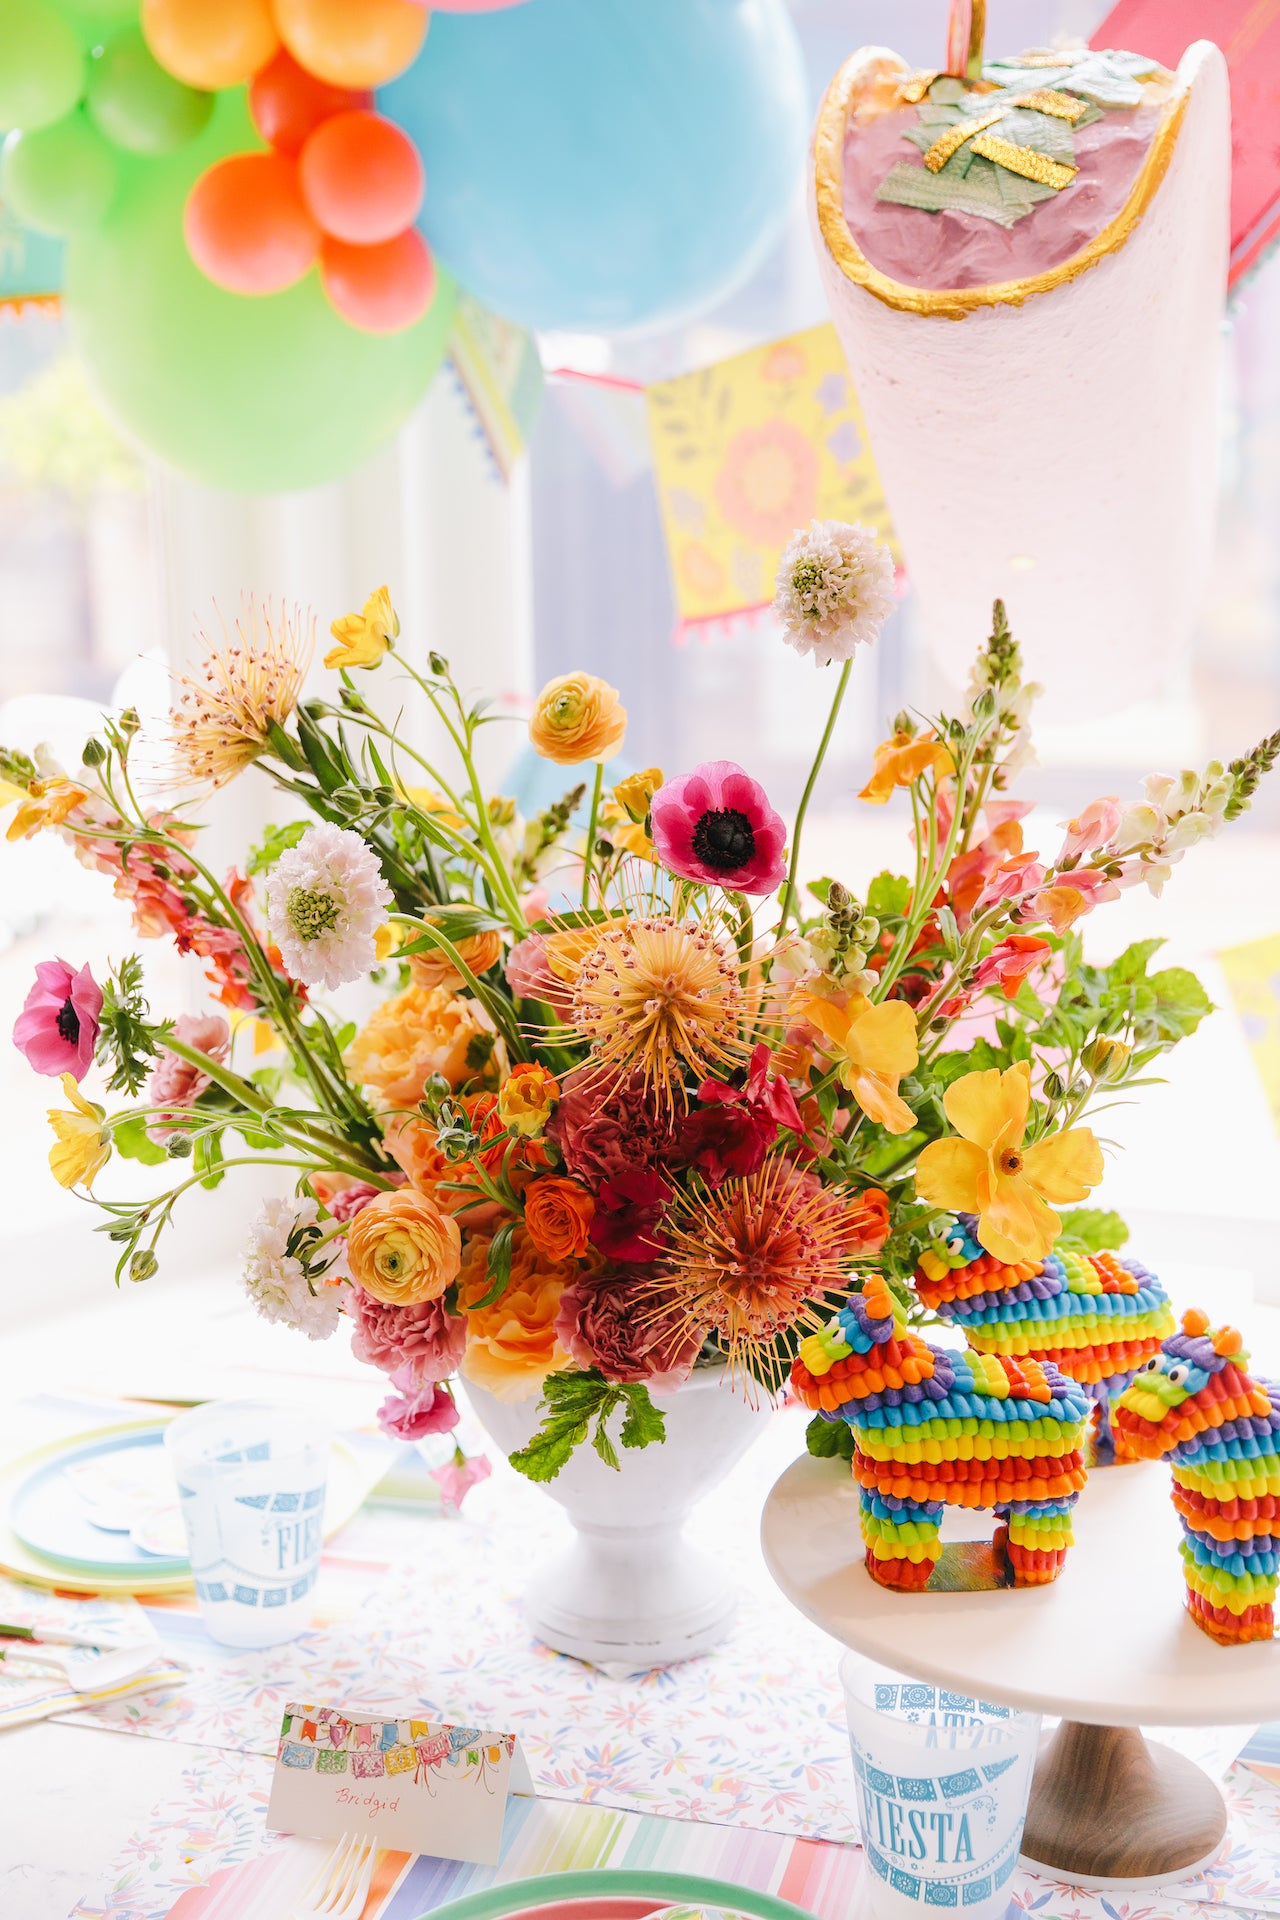 Fiesta party supplies and decoration ideas.